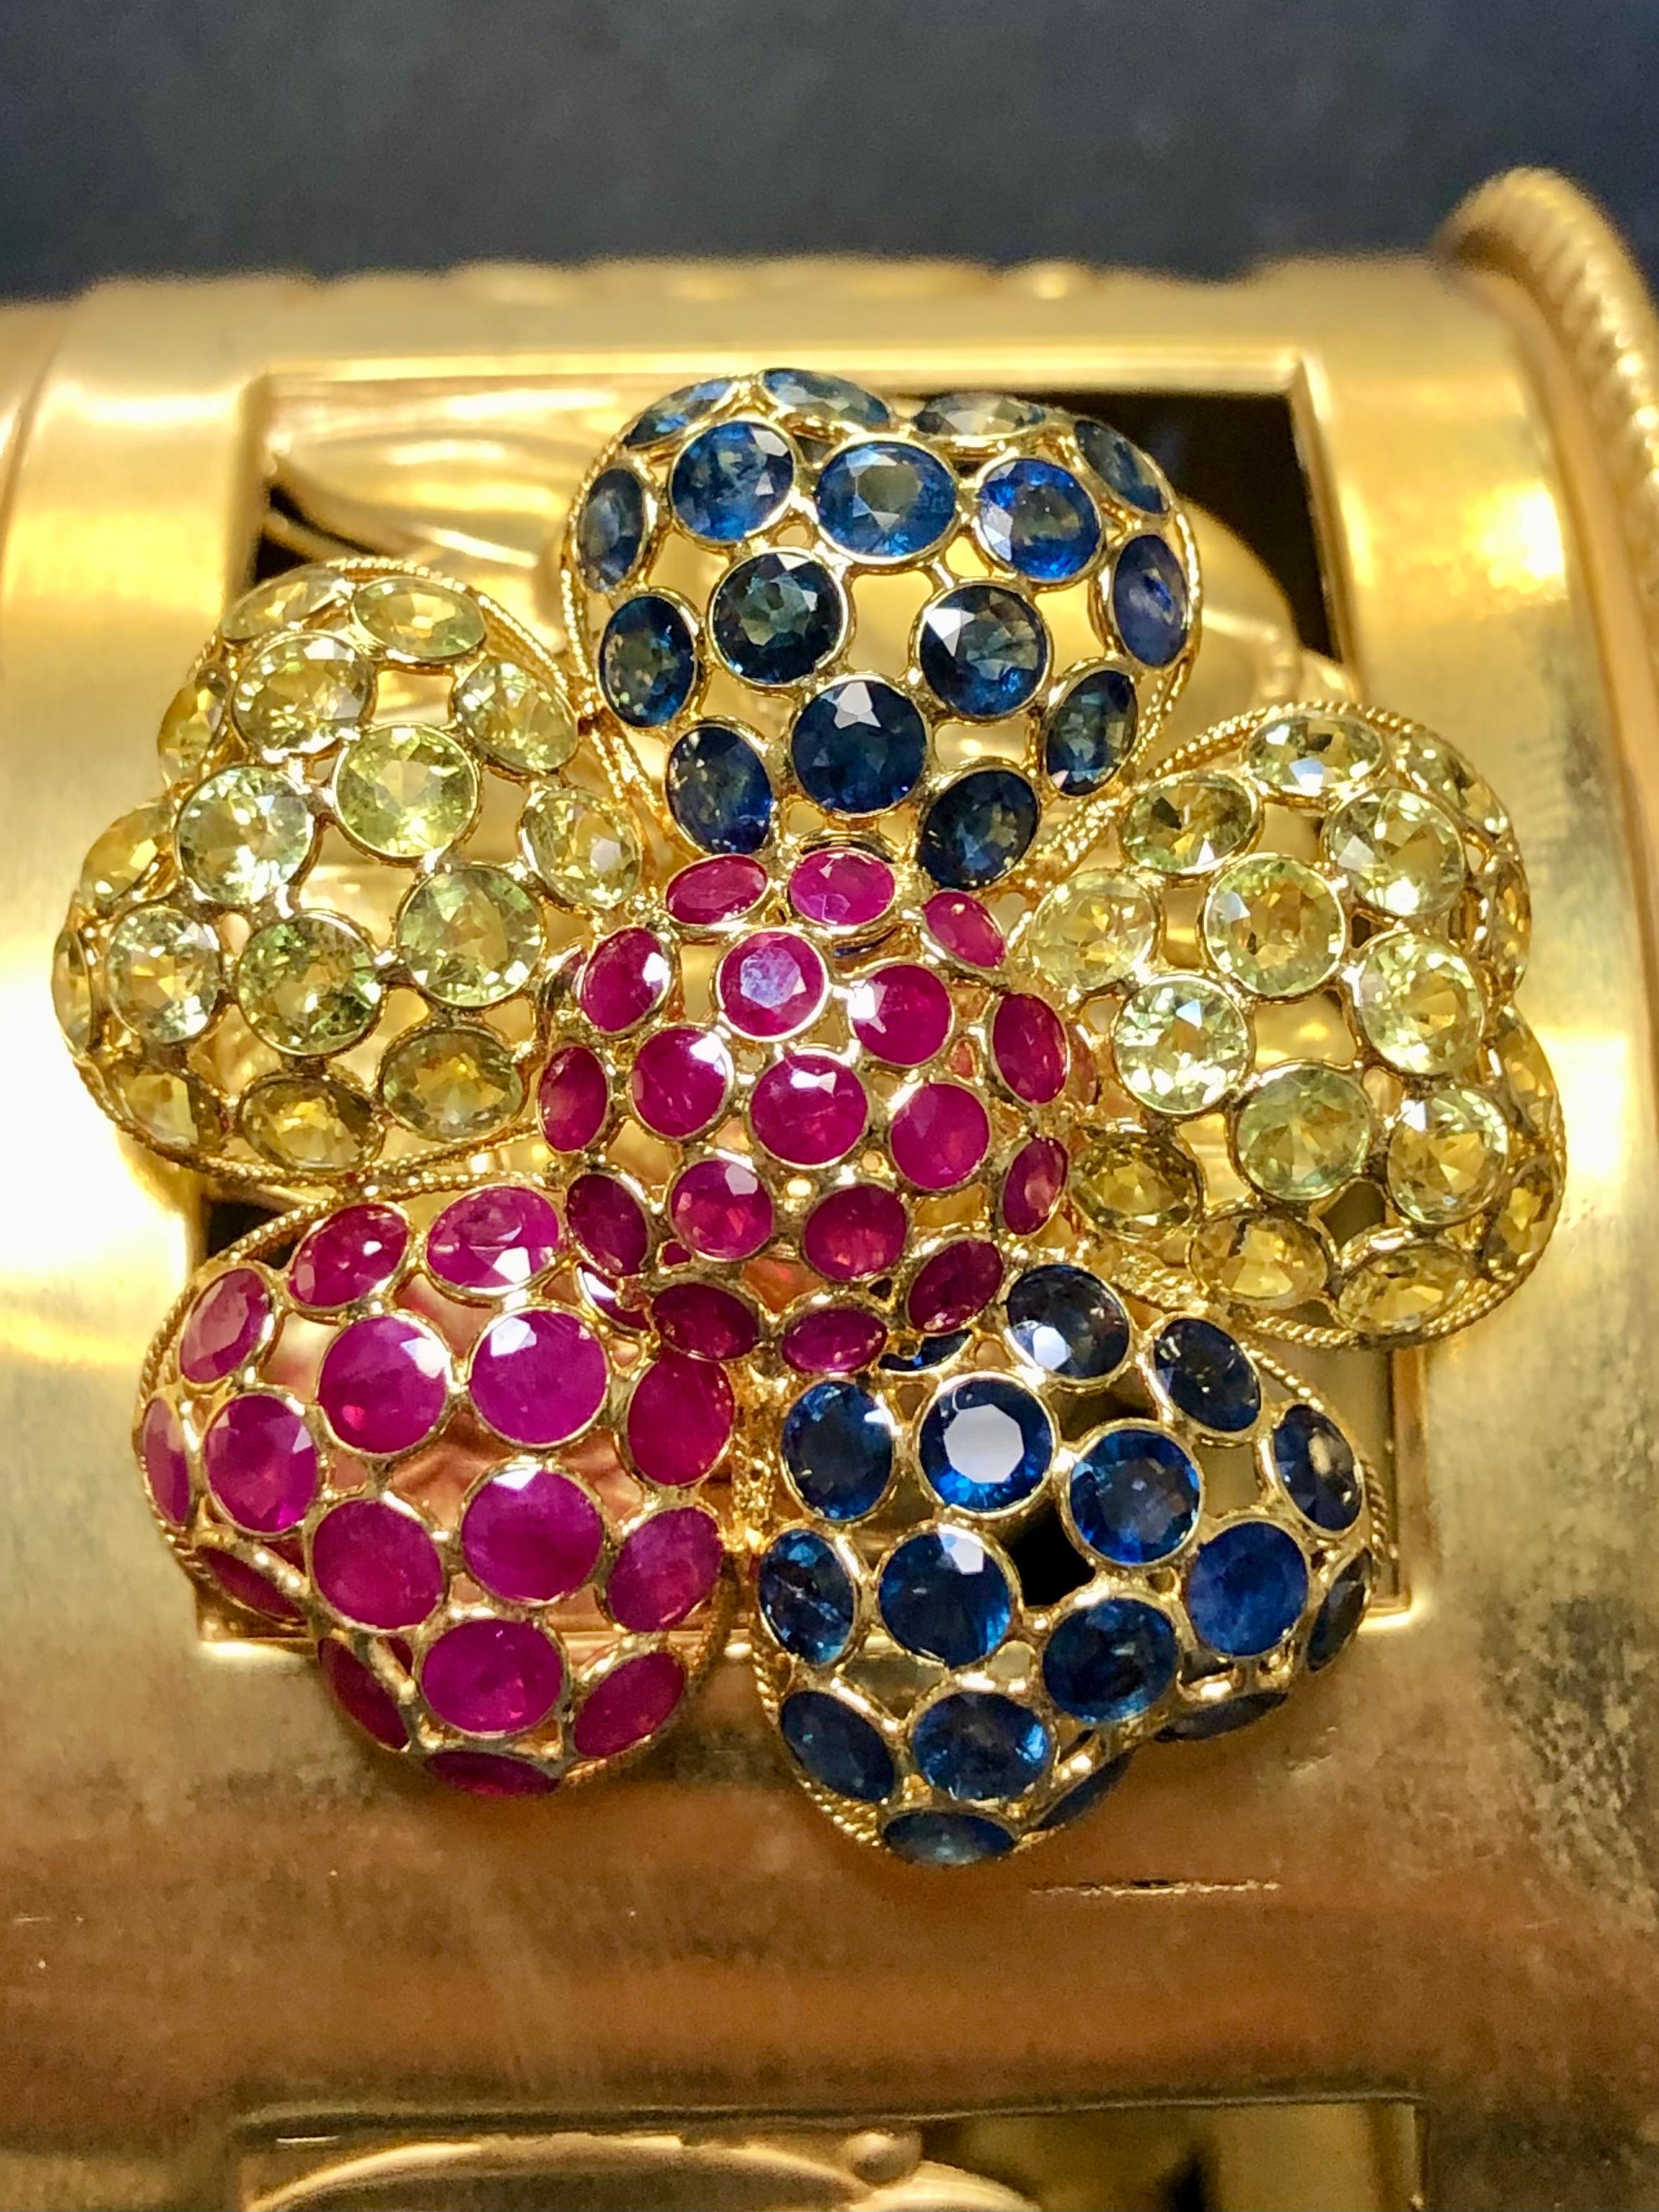 A lively brooch beautifully crafted in deep 18K yellow gold and bezel set with approximately 5.25cttw in rubies, 5.10cttw in blue sapphires and 5.10cttw in yellow sapphires. The beautiful mixture of colors really makes this piece